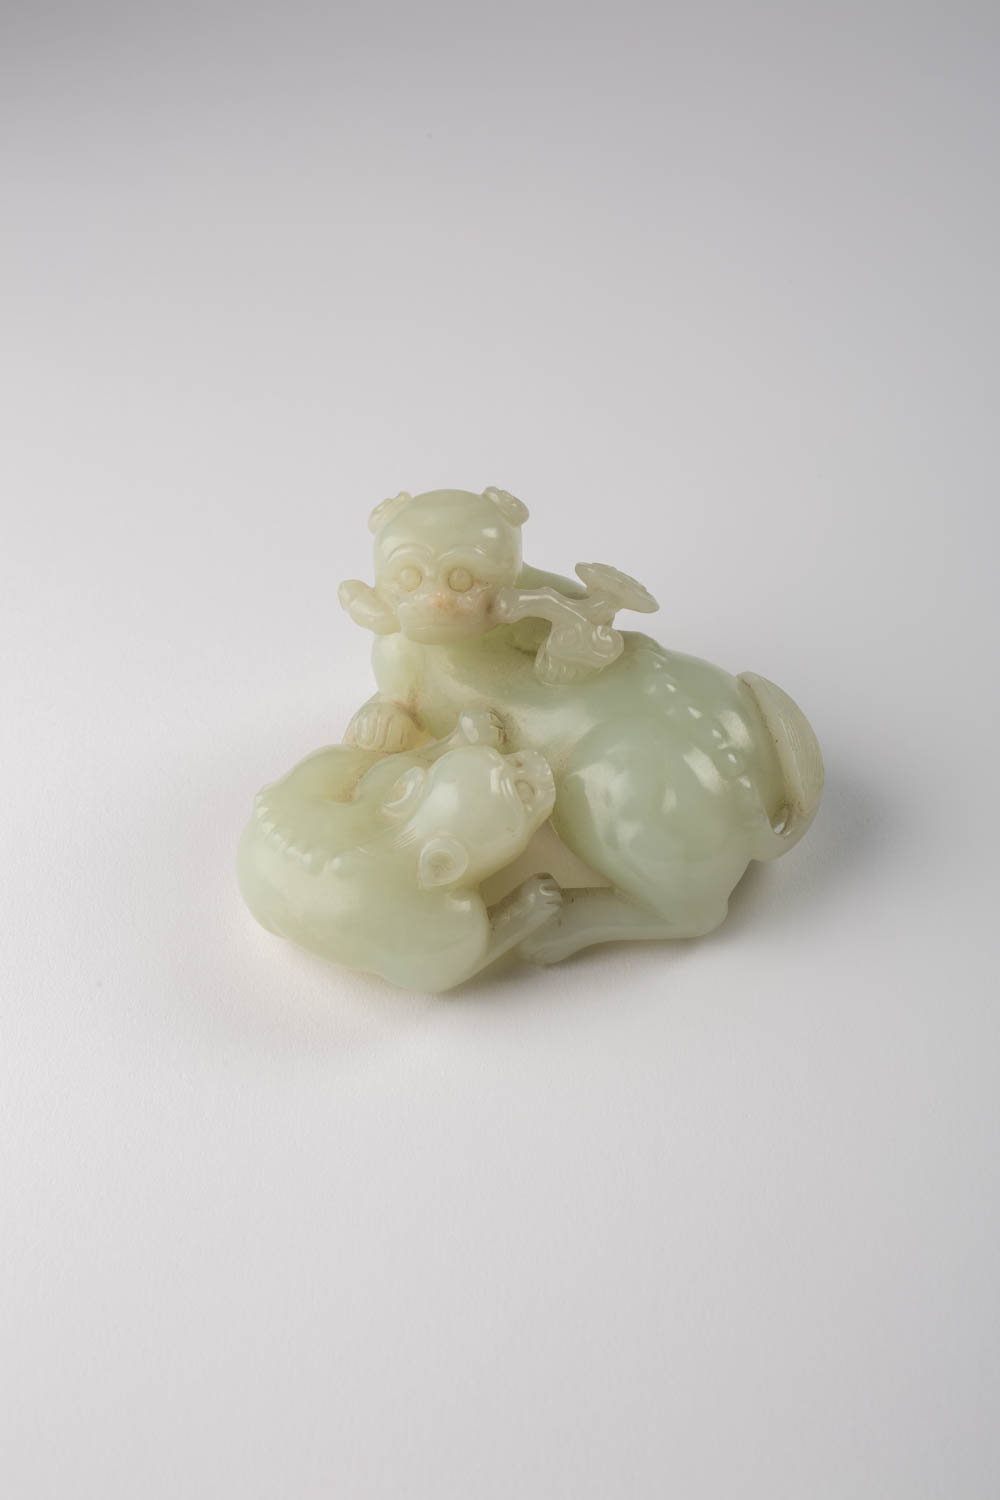 A CHINESE PALE CELADON JADE LION DOG GROUP 19TH CENTURY Carved as a recumbent mother and pup, both - Image 2 of 2